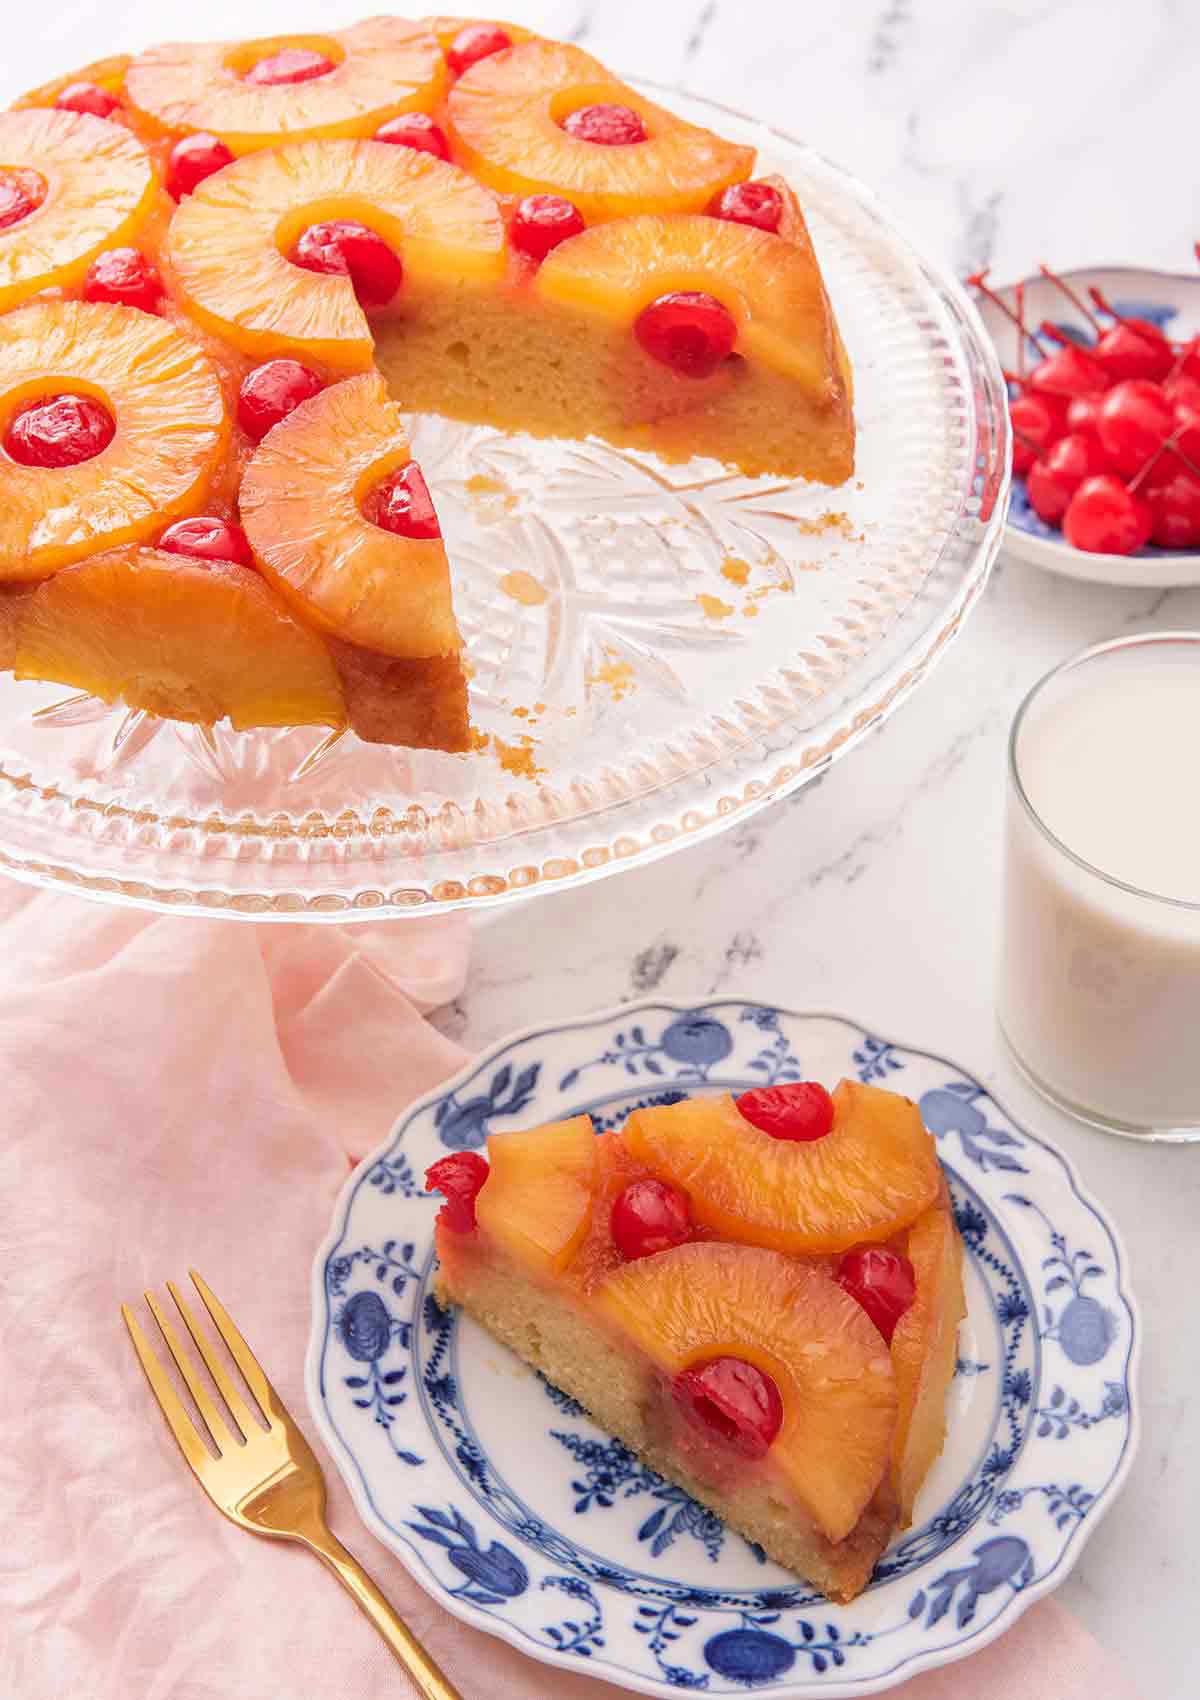 A pineapple upside down cake on a cake stand with a slice cut out and placed on a plate in front of it.